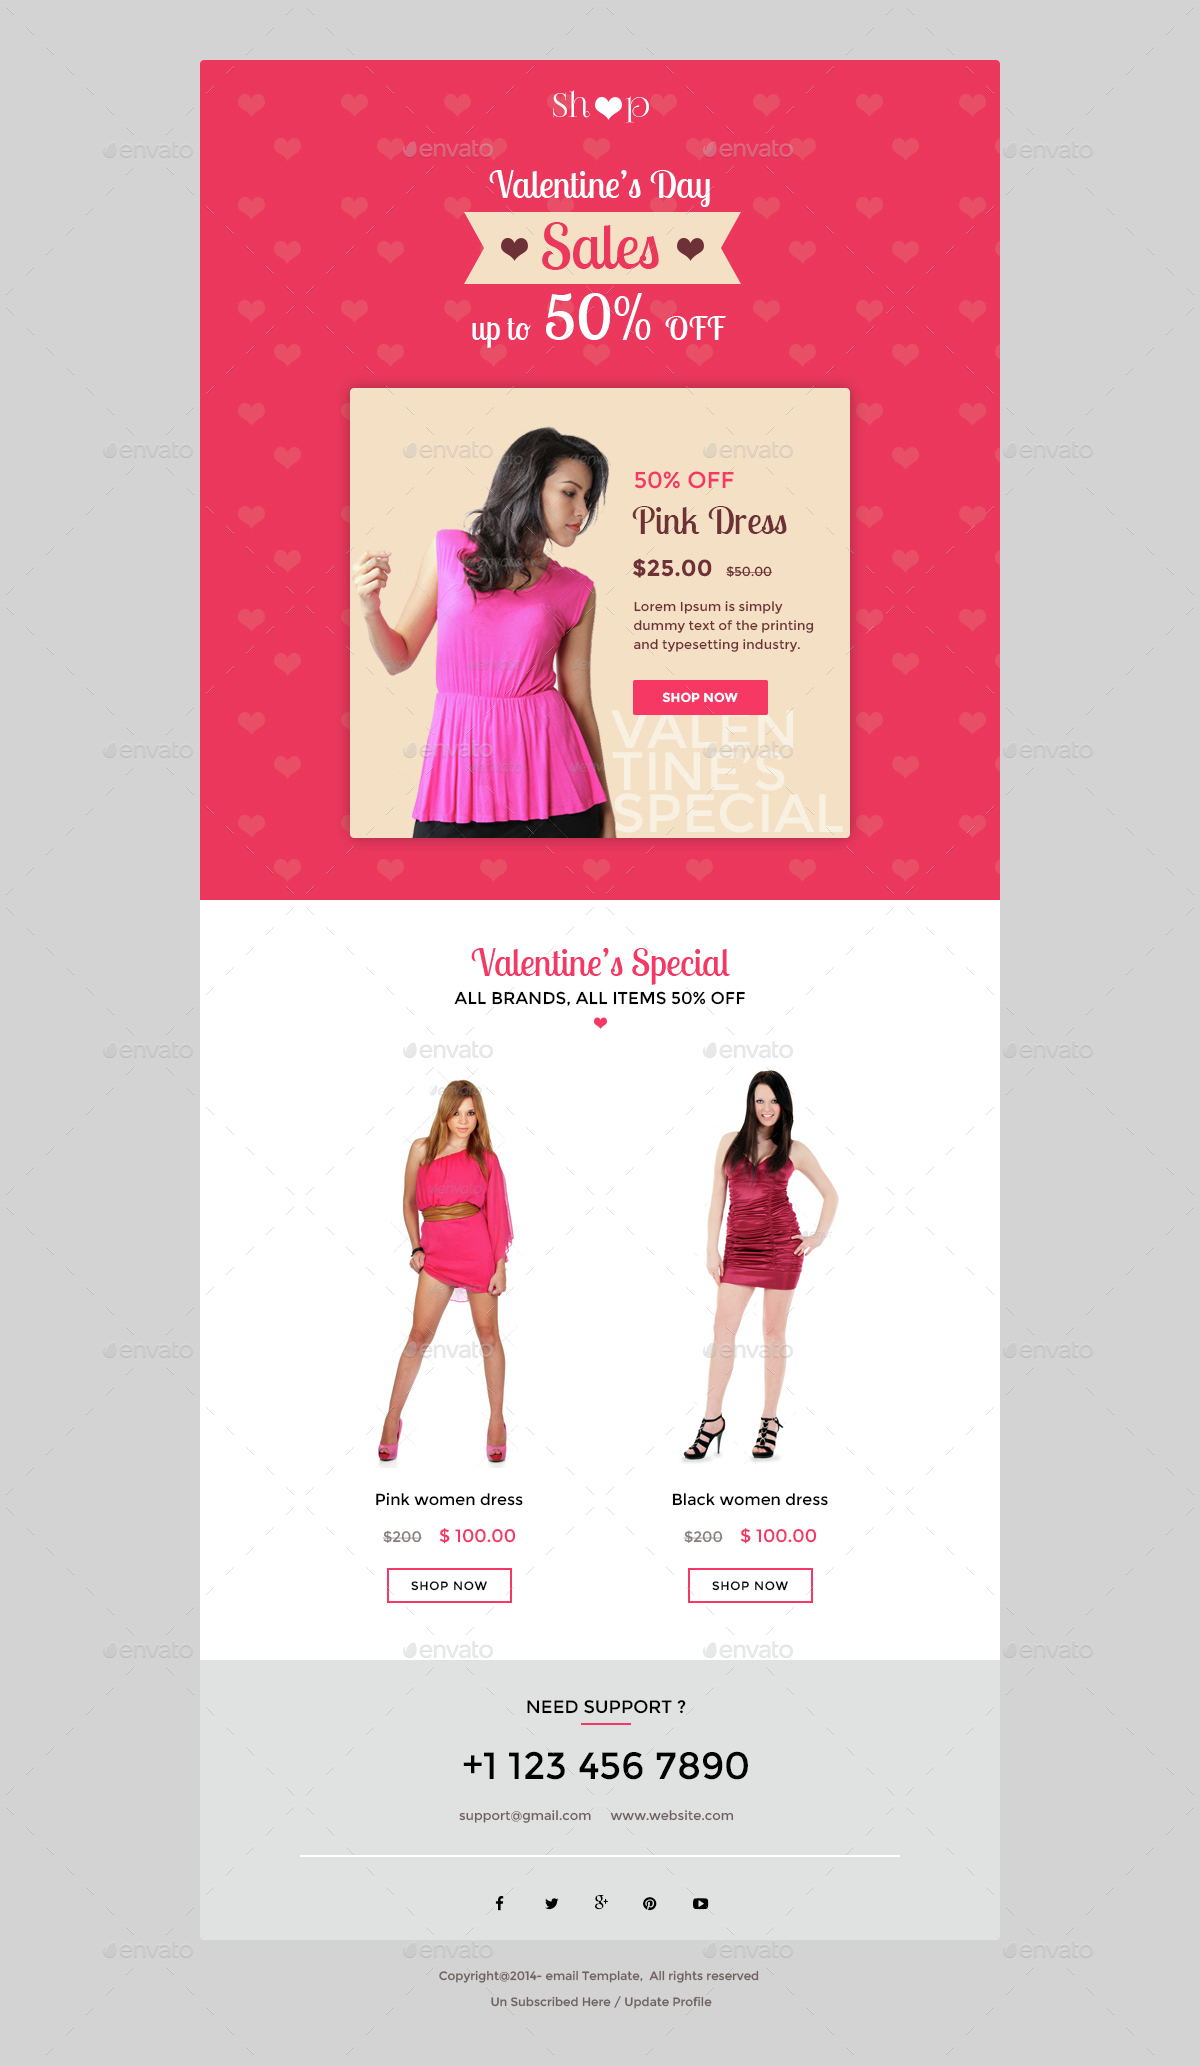 valentine-s-day-shopping-offers-e-newsletter-psd-template-by